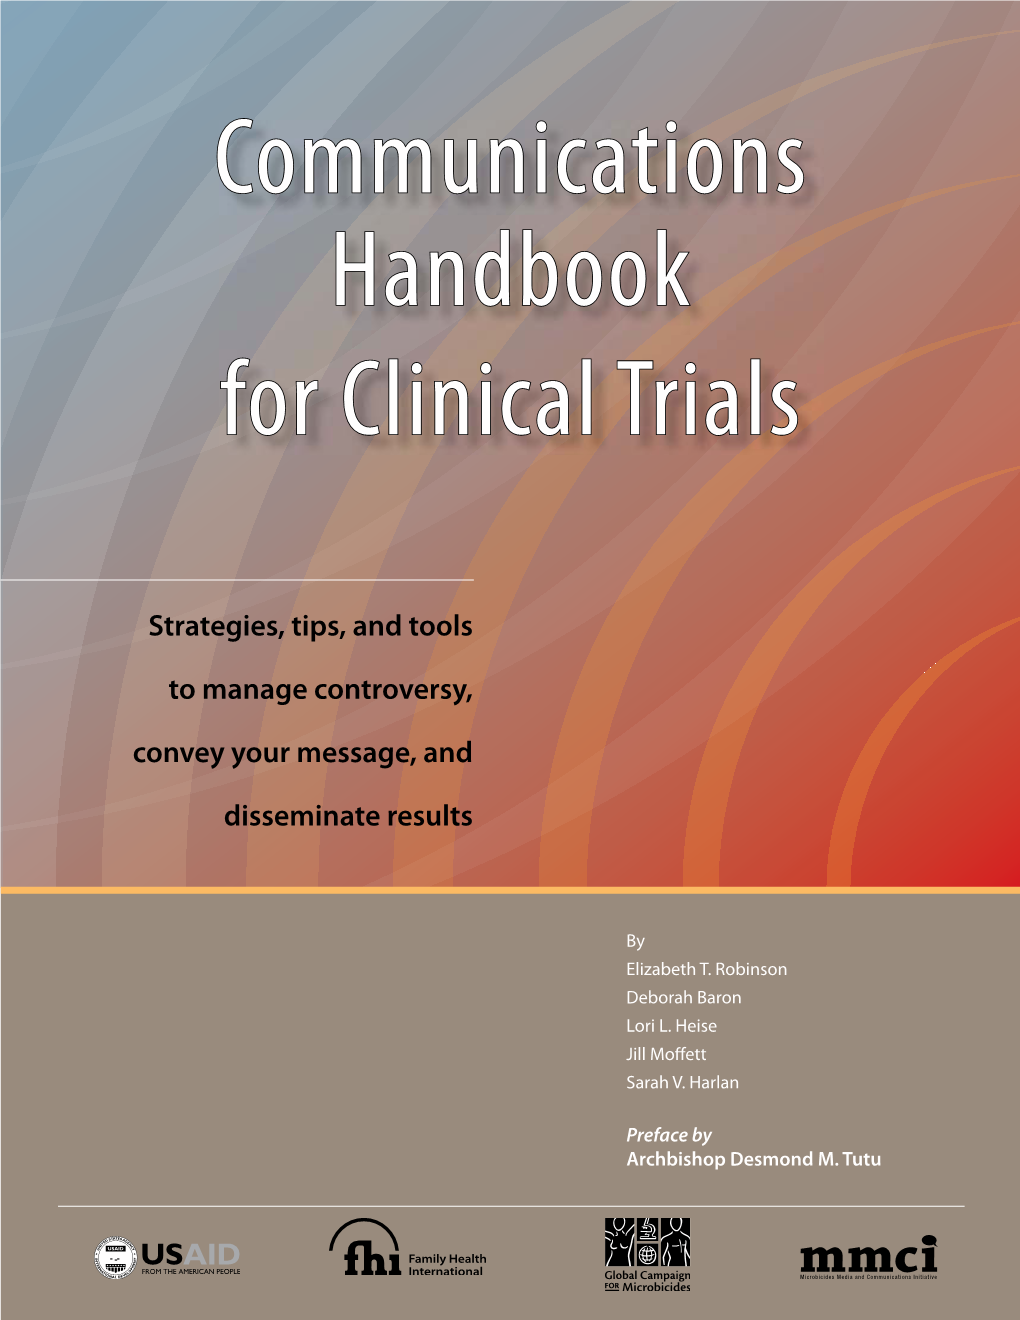 Communications Handbook for Clinical Trials